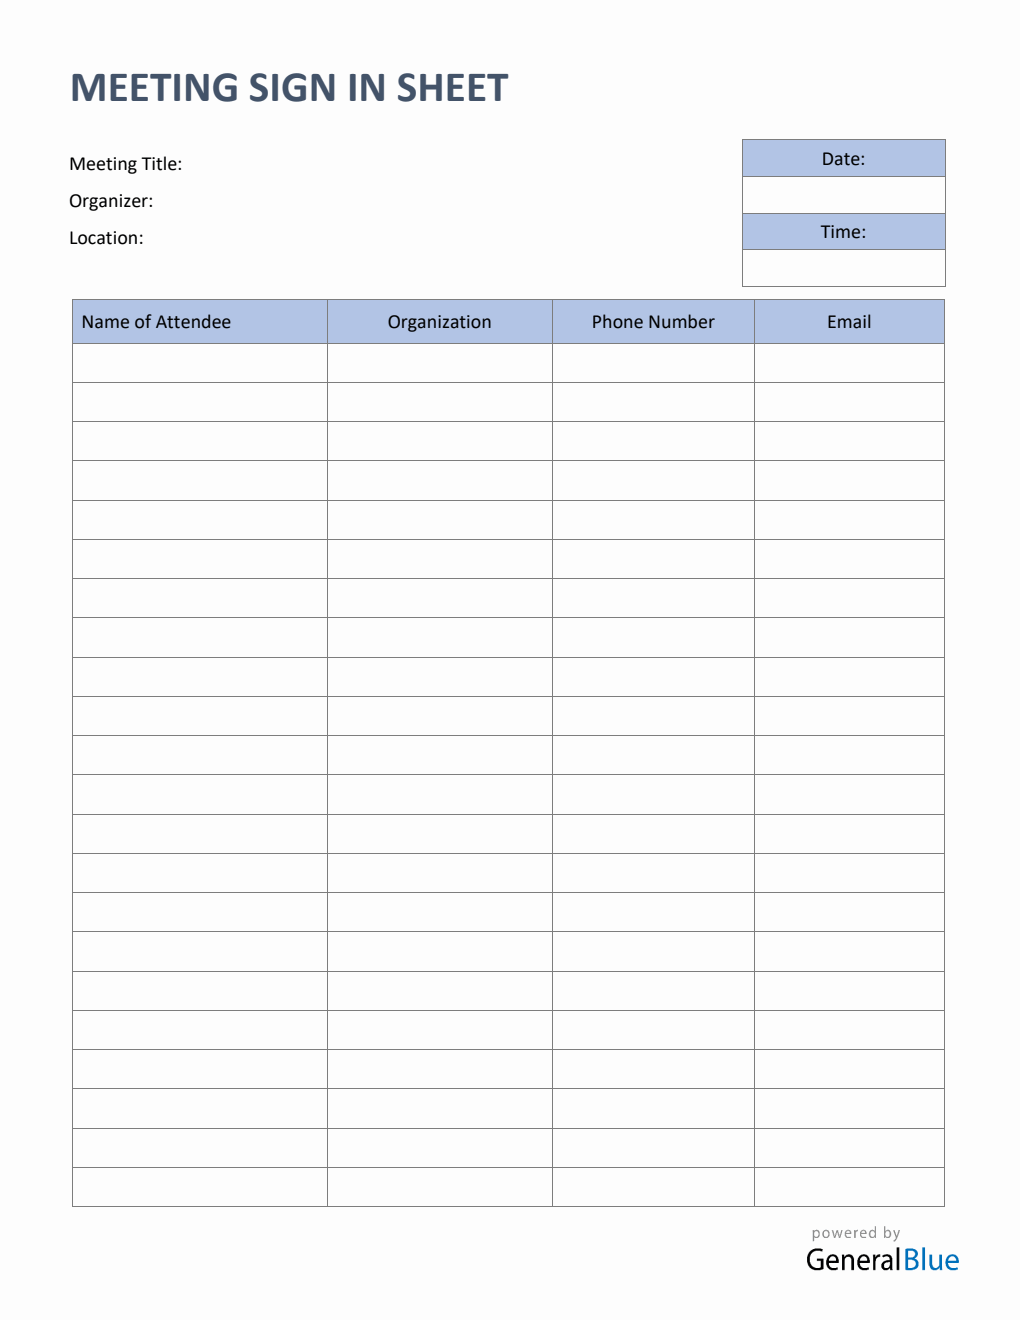 Meeting Sign In Sheet in Word